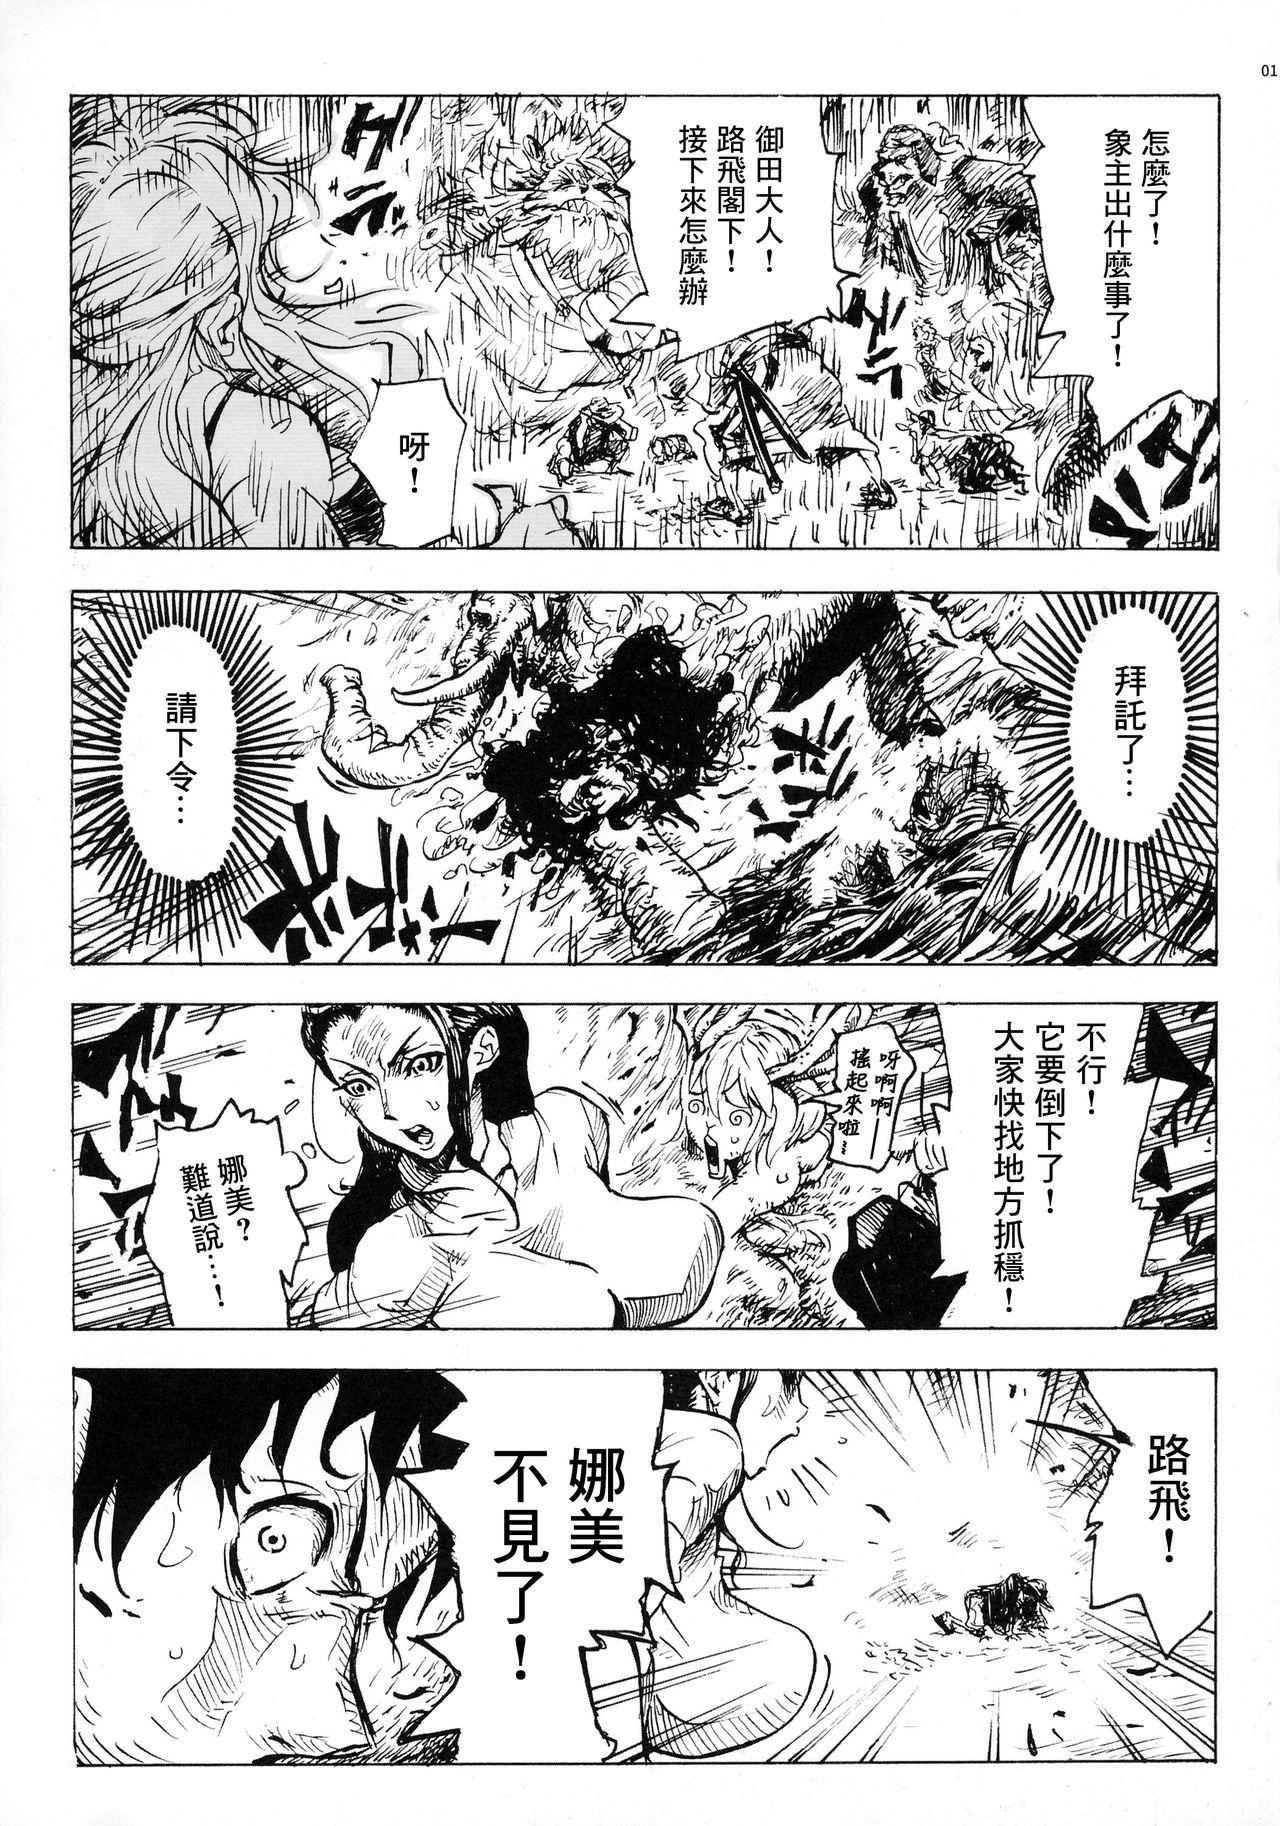 Korea P.O.M Another Episode "J.A.C.K" - One piece Gay Outdoor - Page 4